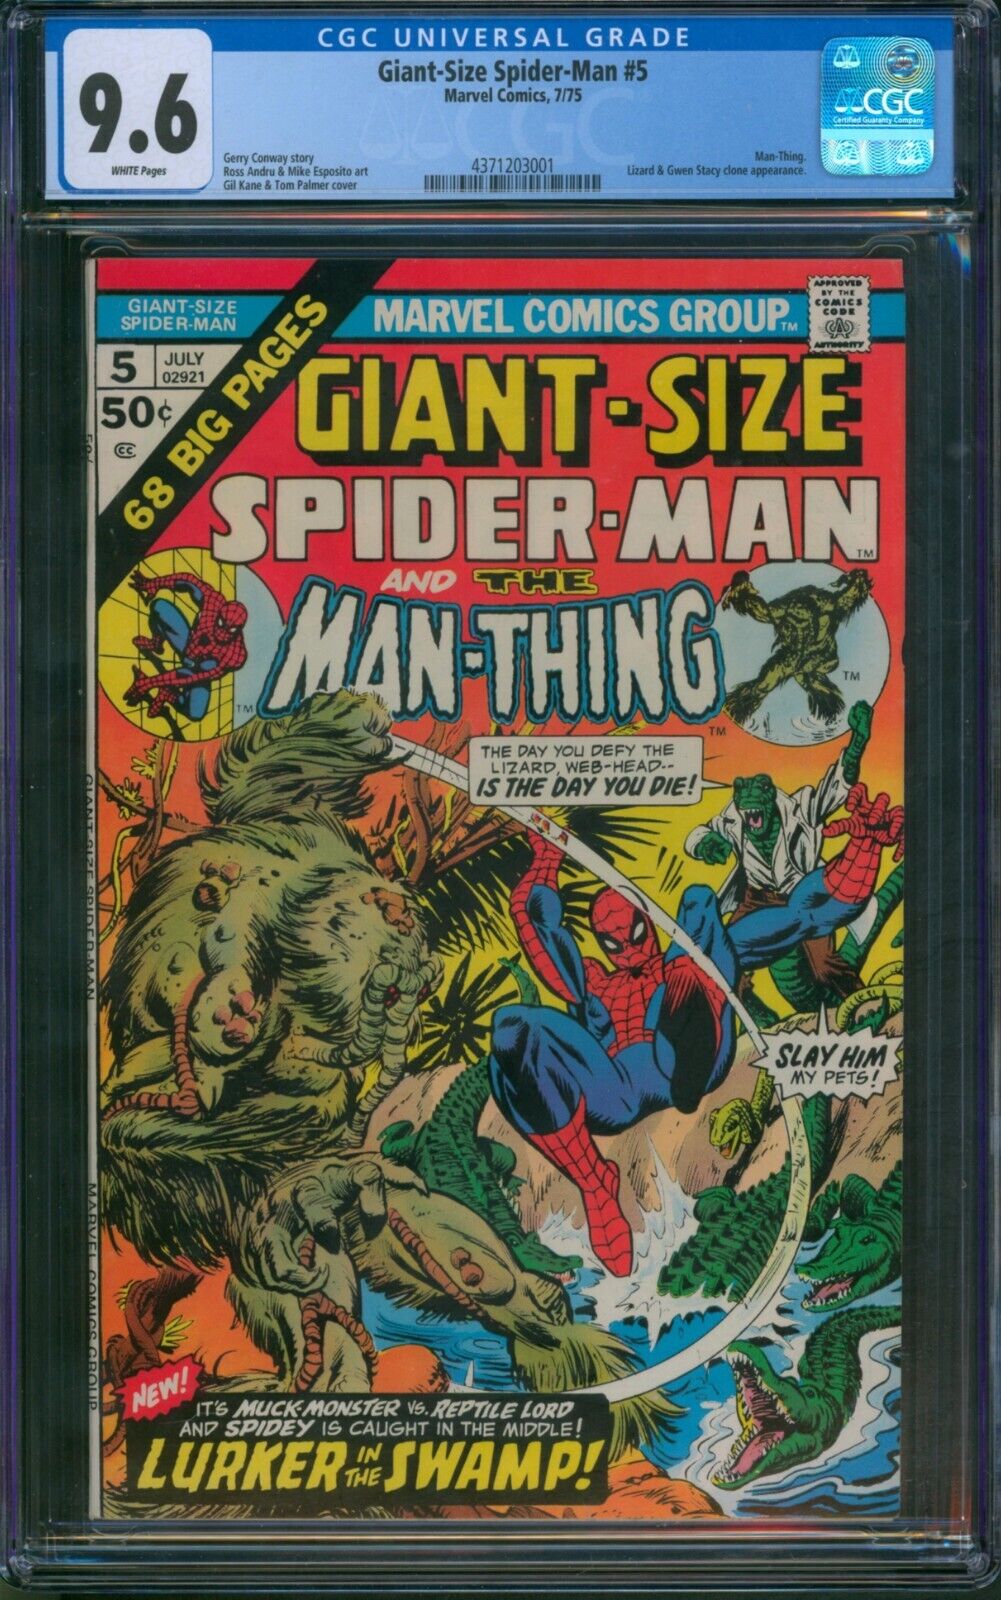 Giant-Size Spider-Man #5 ⭐ CGC 9.6 White Pages ⭐ Man-Thing Marvel Comic 1975